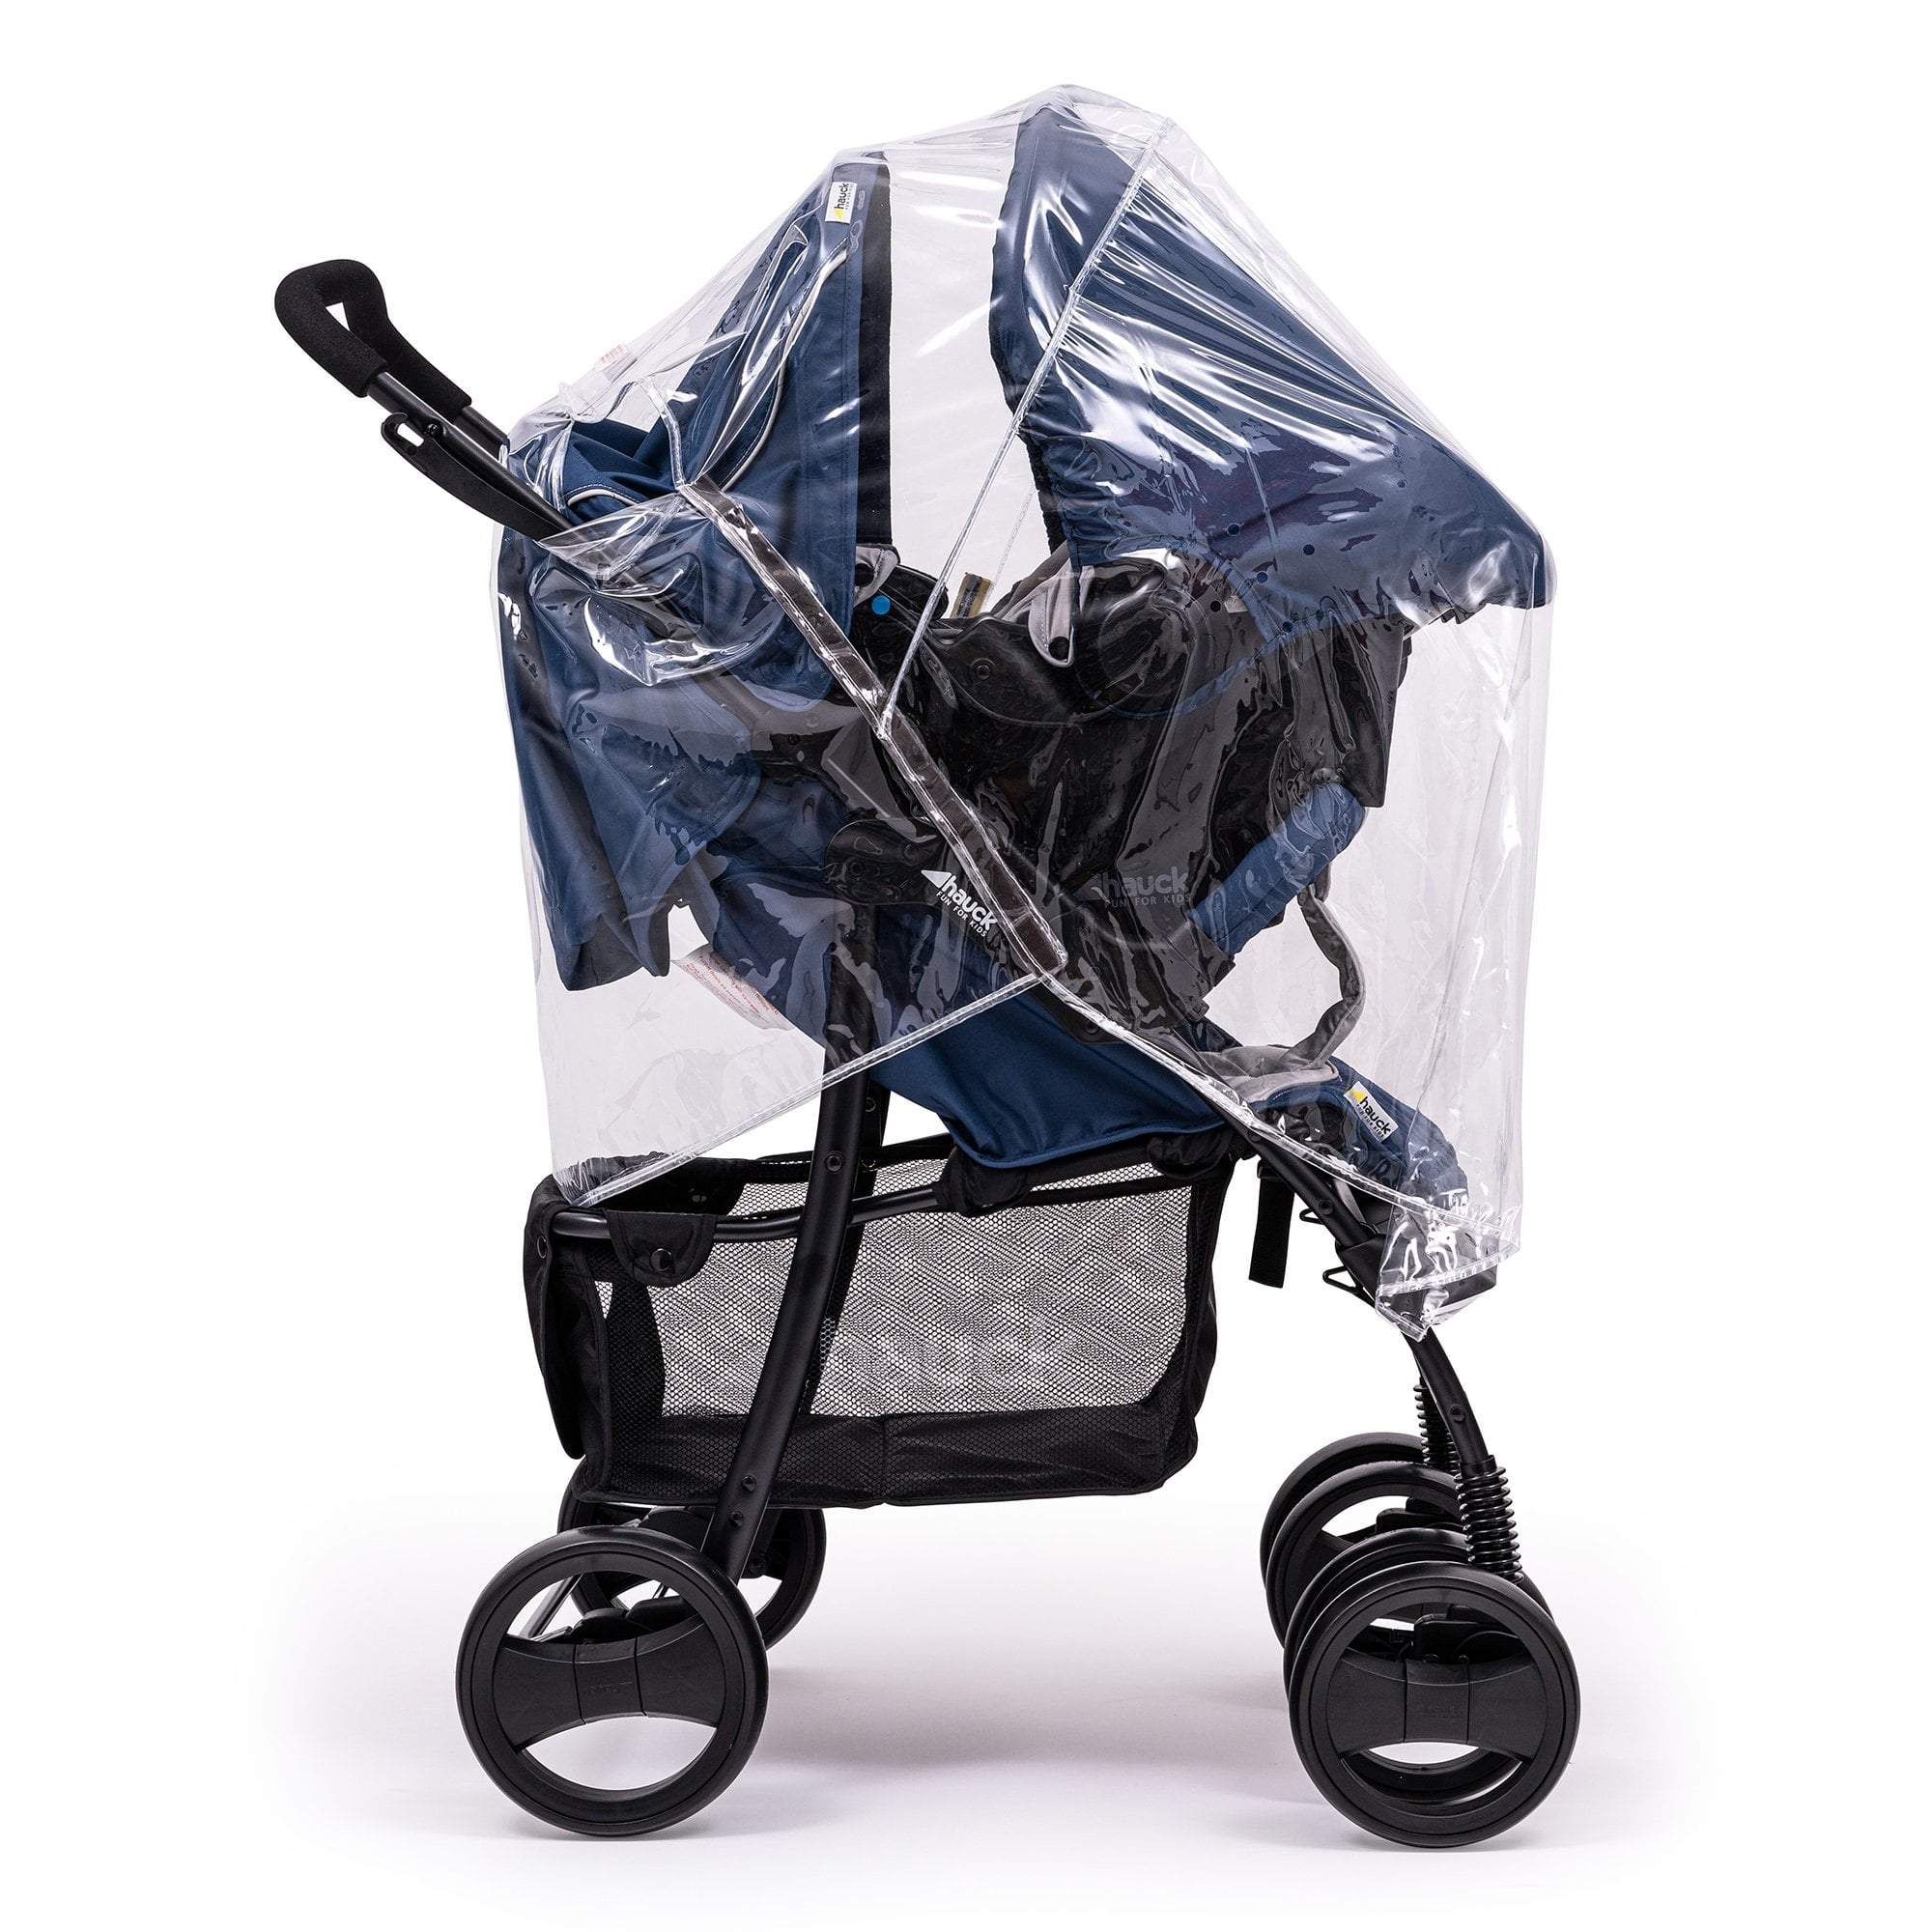 Travel System Raincover Compatible with Brio - Fits All Models - For Your Little One